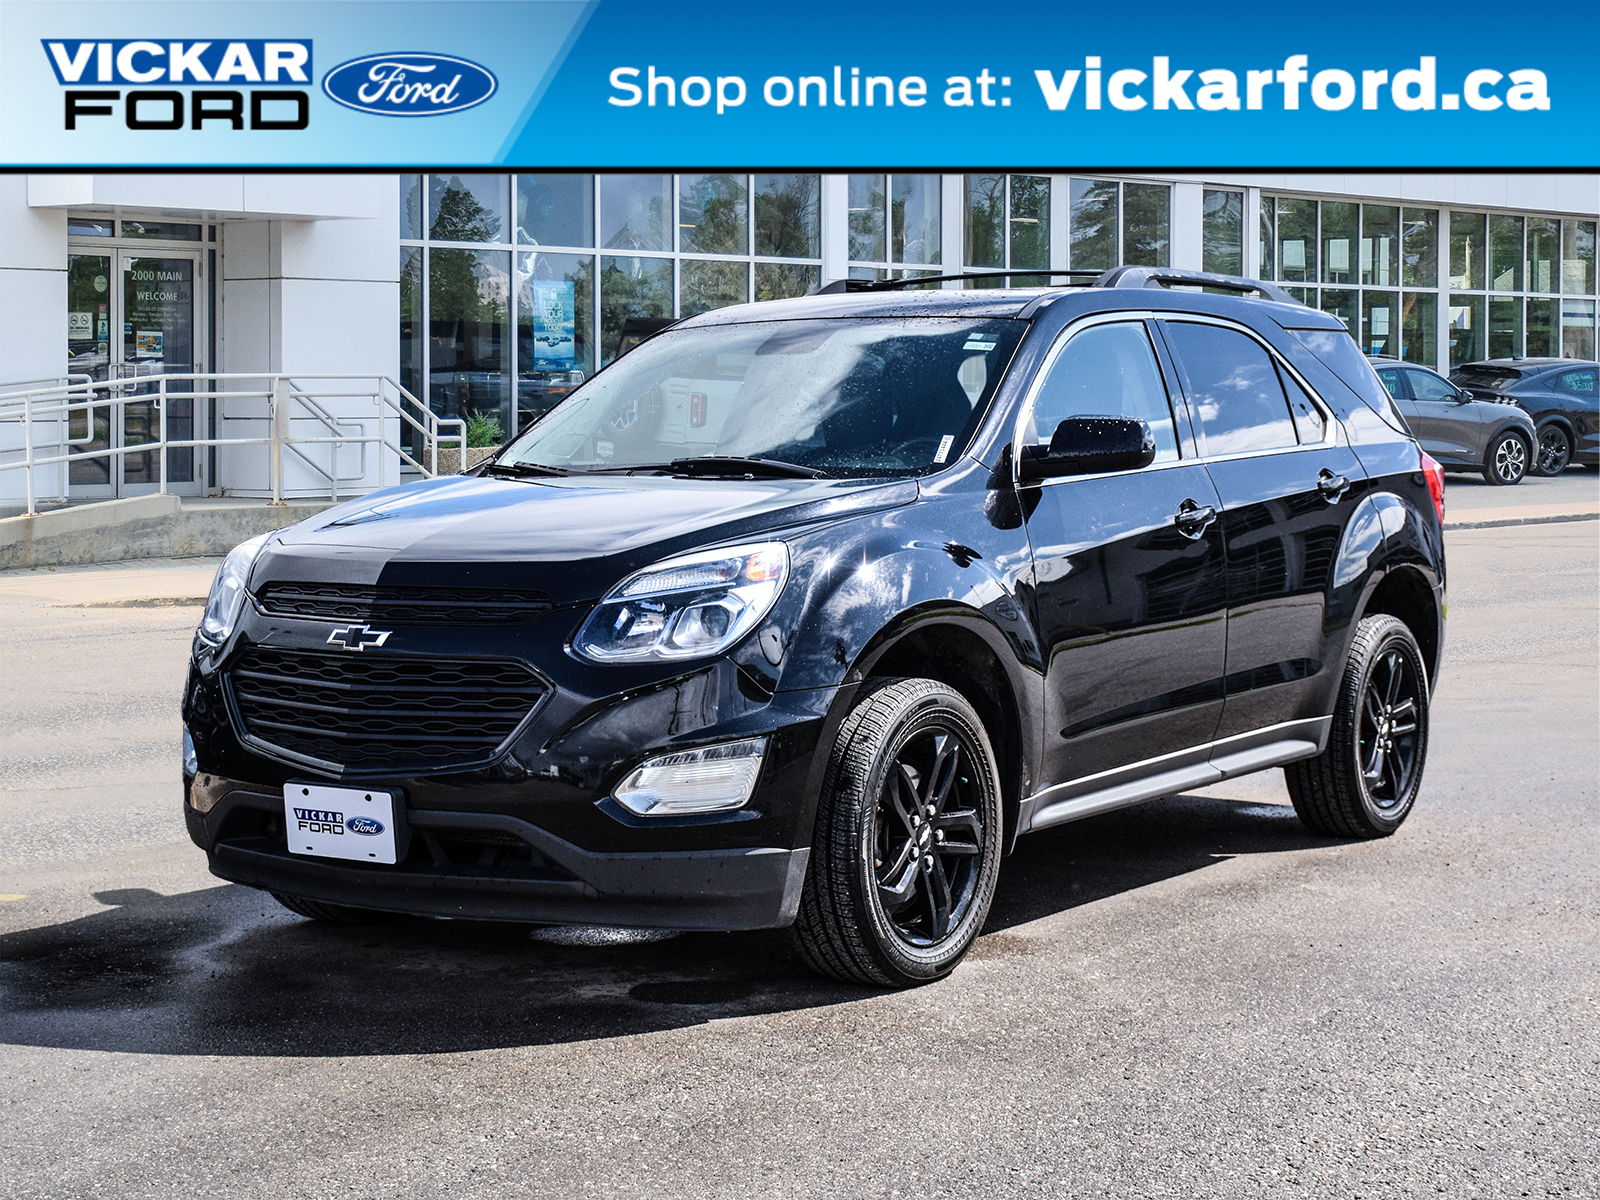 2017 Chevrolet Equinox AWD 4dr LT Local Trade-in